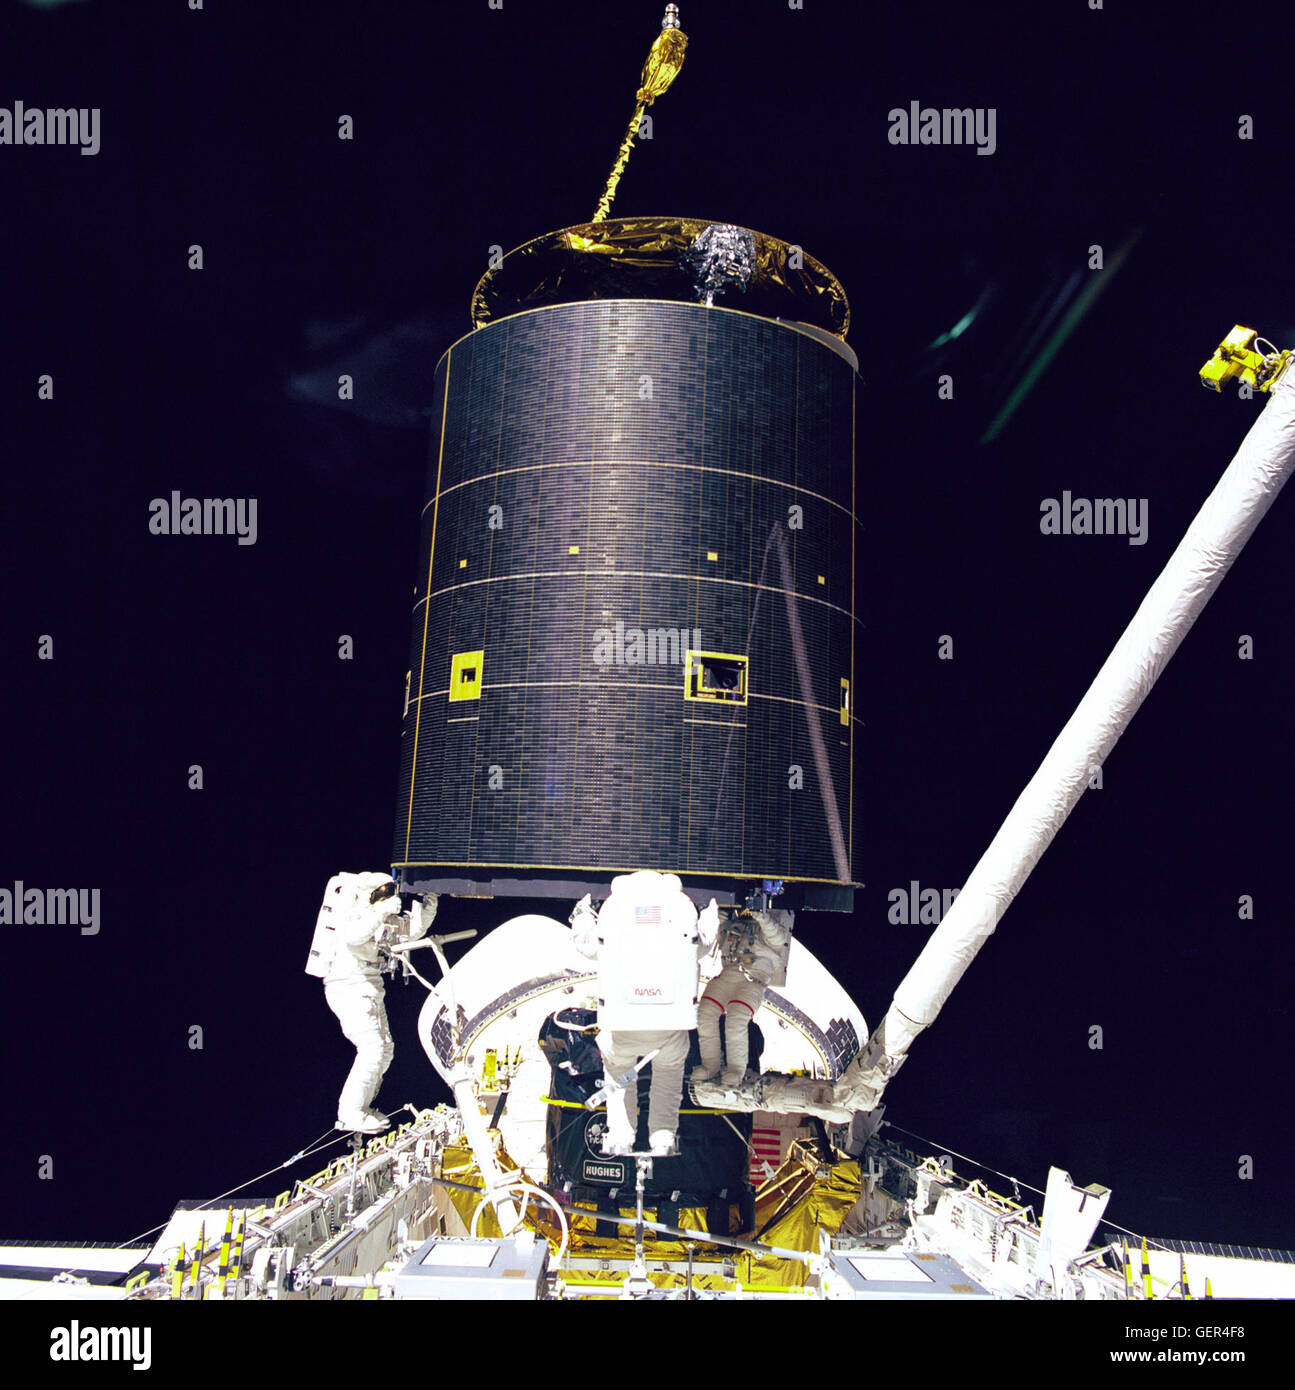 Three crewmembers of mission STS-49 hold onto the 4.5 ton International Telecommunications Organization Satellite (INTELSAT) VI after a six- handed &quot;capture&quot; was made minutes earlier during the mission's third extravehicular activity (EVA). From left to right: Mission Specialists Richard J. Hieb, Thomas D. Akers, and Pierre J. Thuot. The three prepare to attach the capture bar which is tethered to Hieb. Thuot is positioned on the Remote Manipulator System (RMS) arm, from which he had made two earlier unsuccessful grapple attempts on two- person EVA sessions. Ground controllers and cr Stock Photo